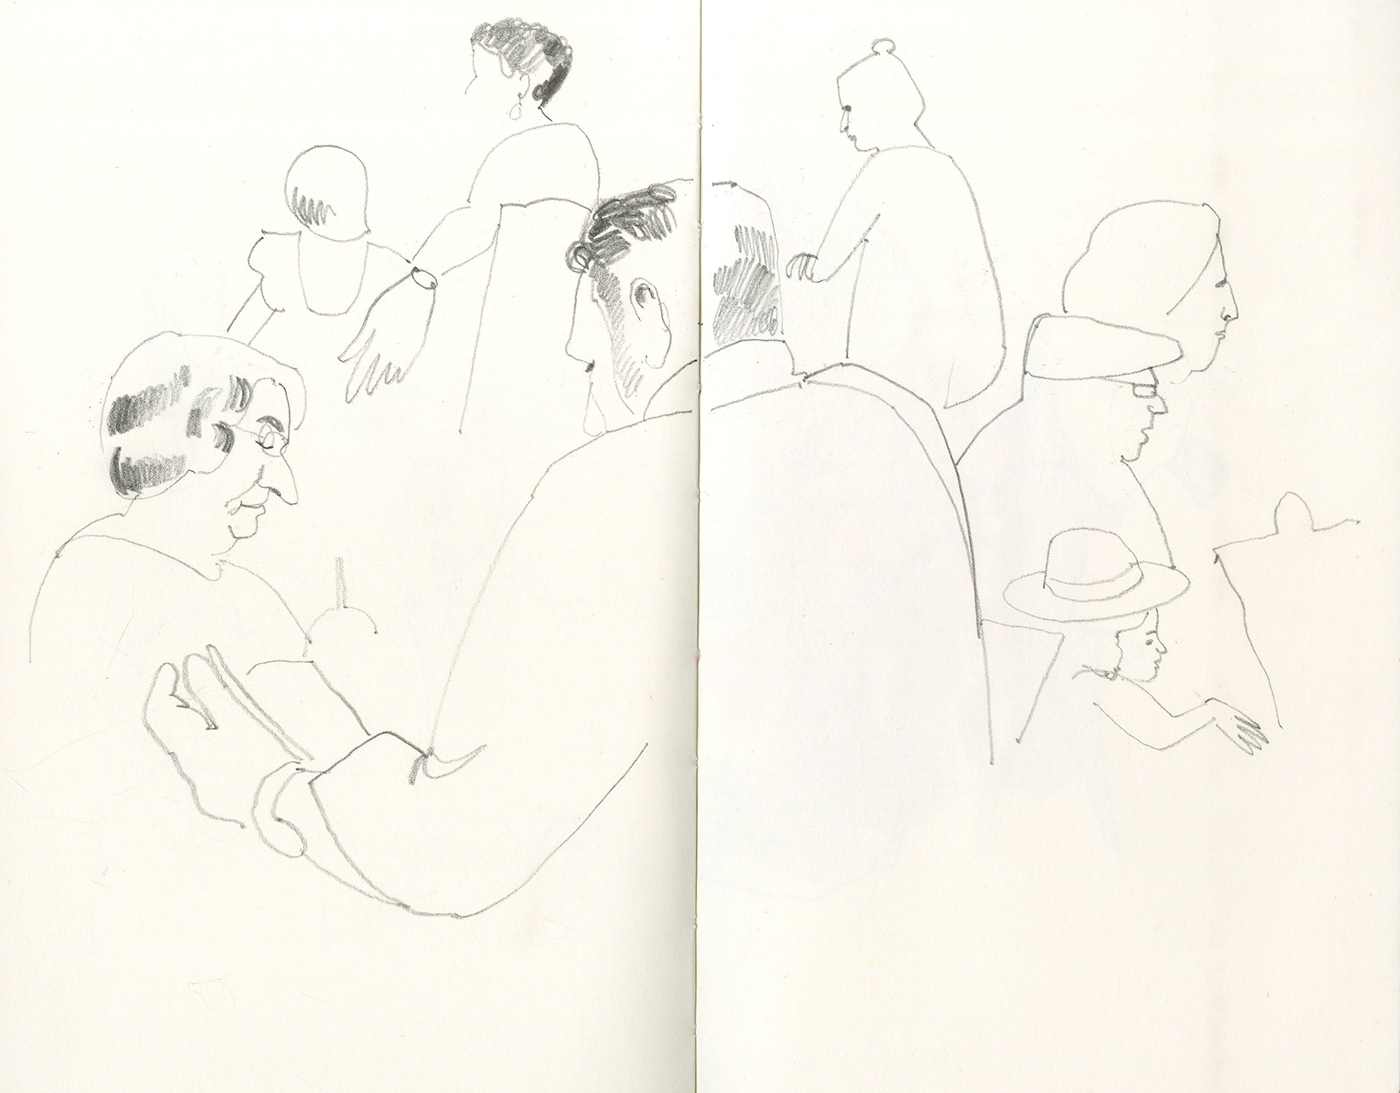 drawing on location music figurative concerts life drawing animals people Genre sketchbook sketch